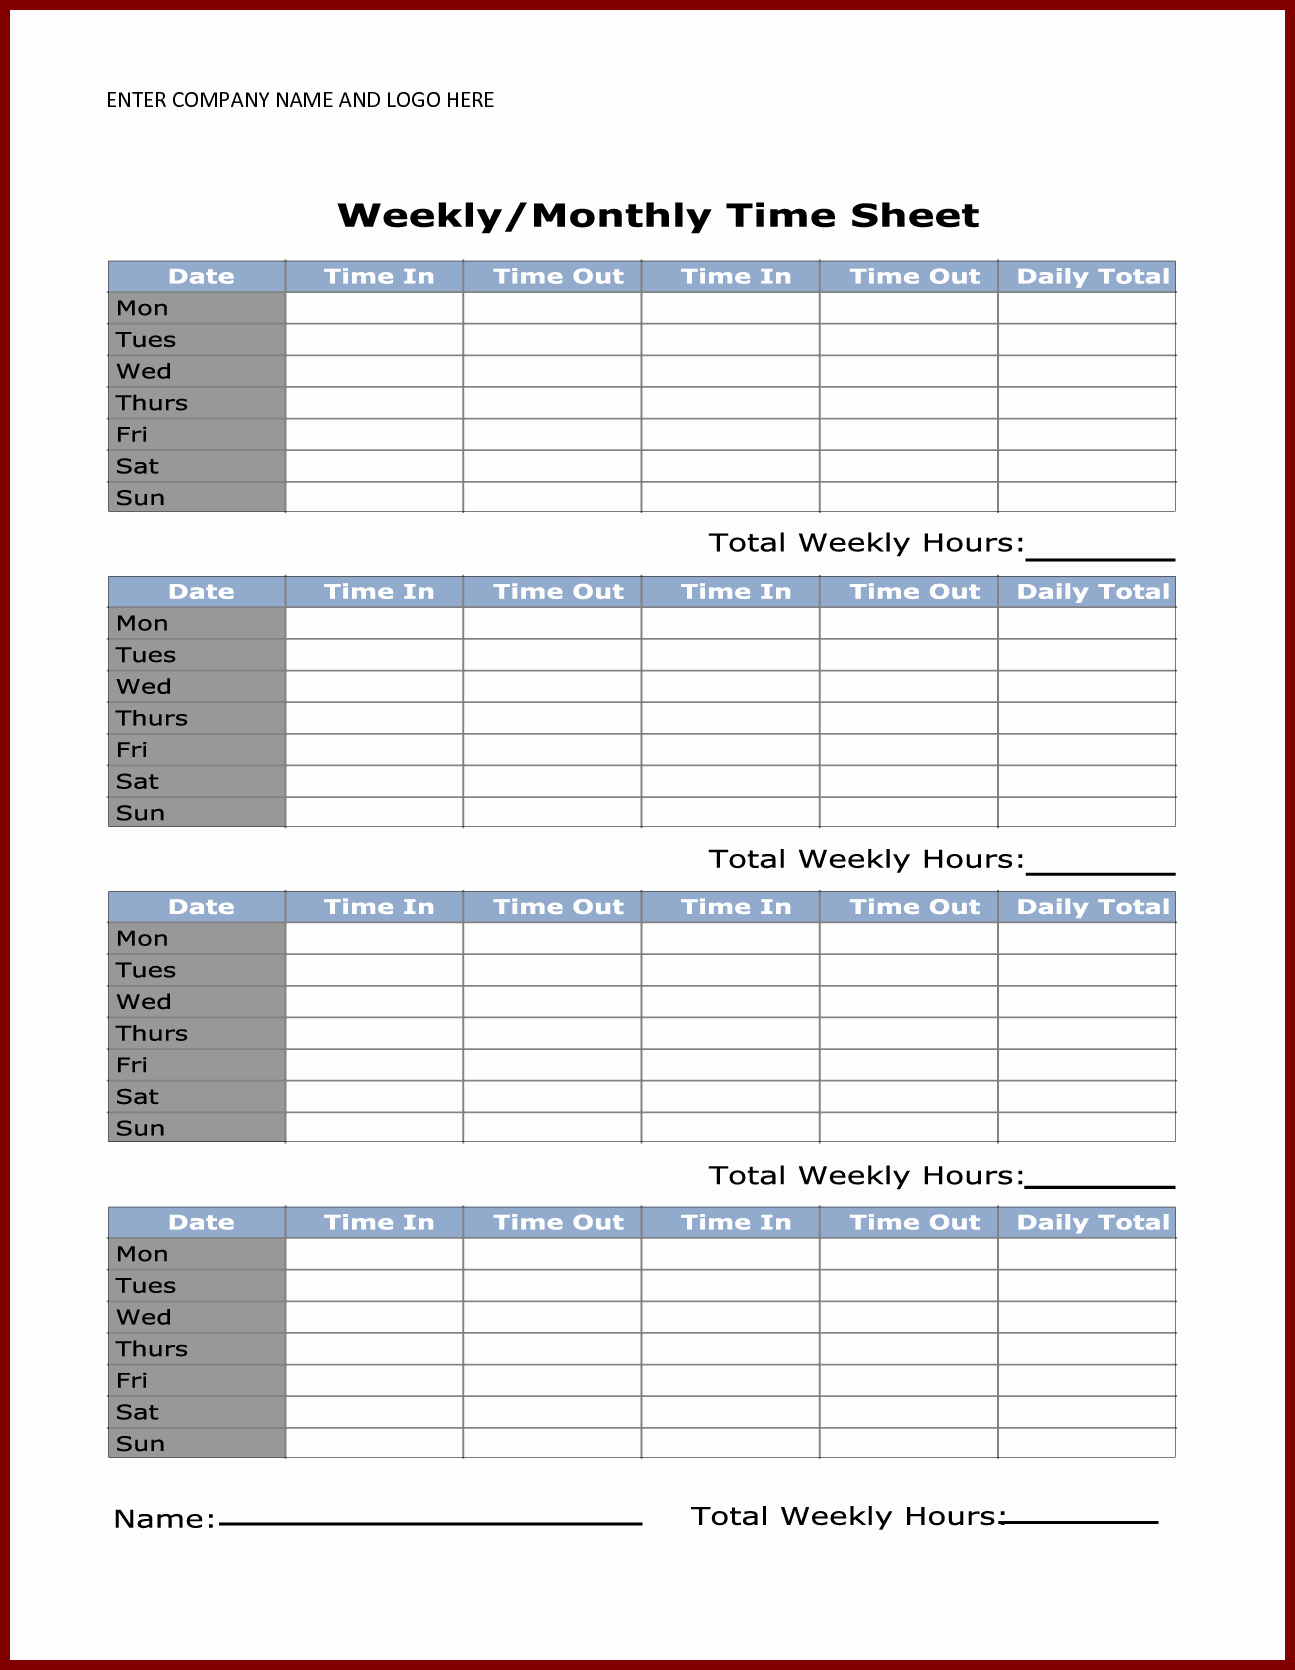 Sample Time Sheets To Print – Emilys-Welt.eu - Free Printable Time Sheets Forms